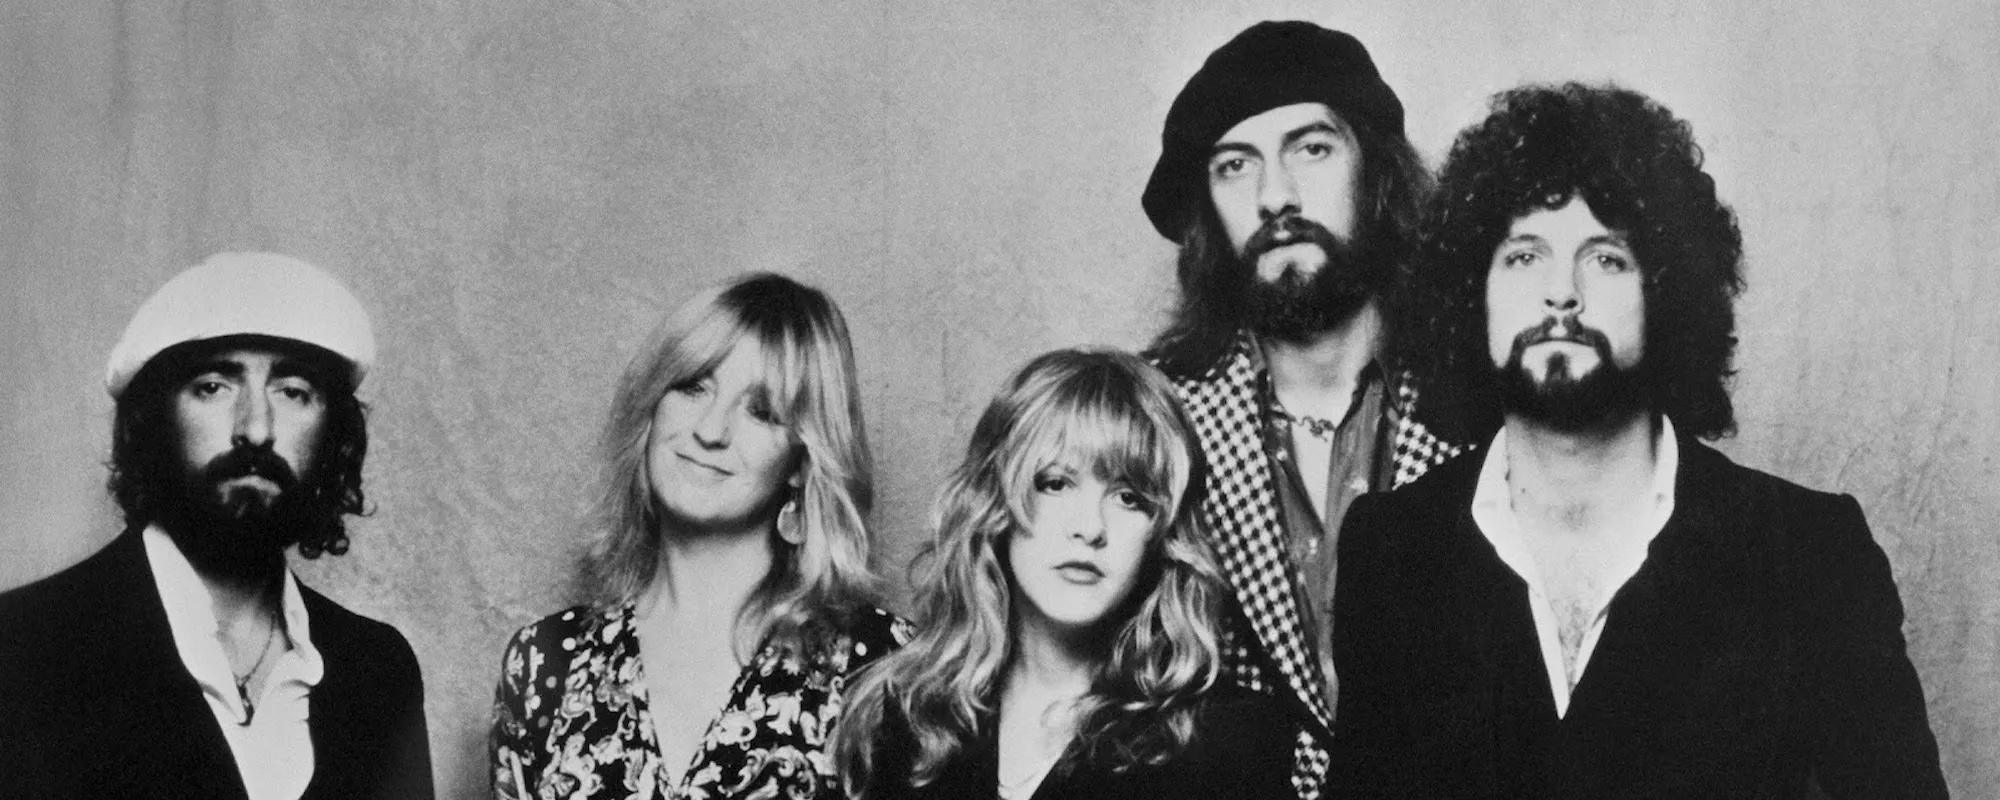 Behind the Beef: A Look at Fleetwood Mac’s Complicated History